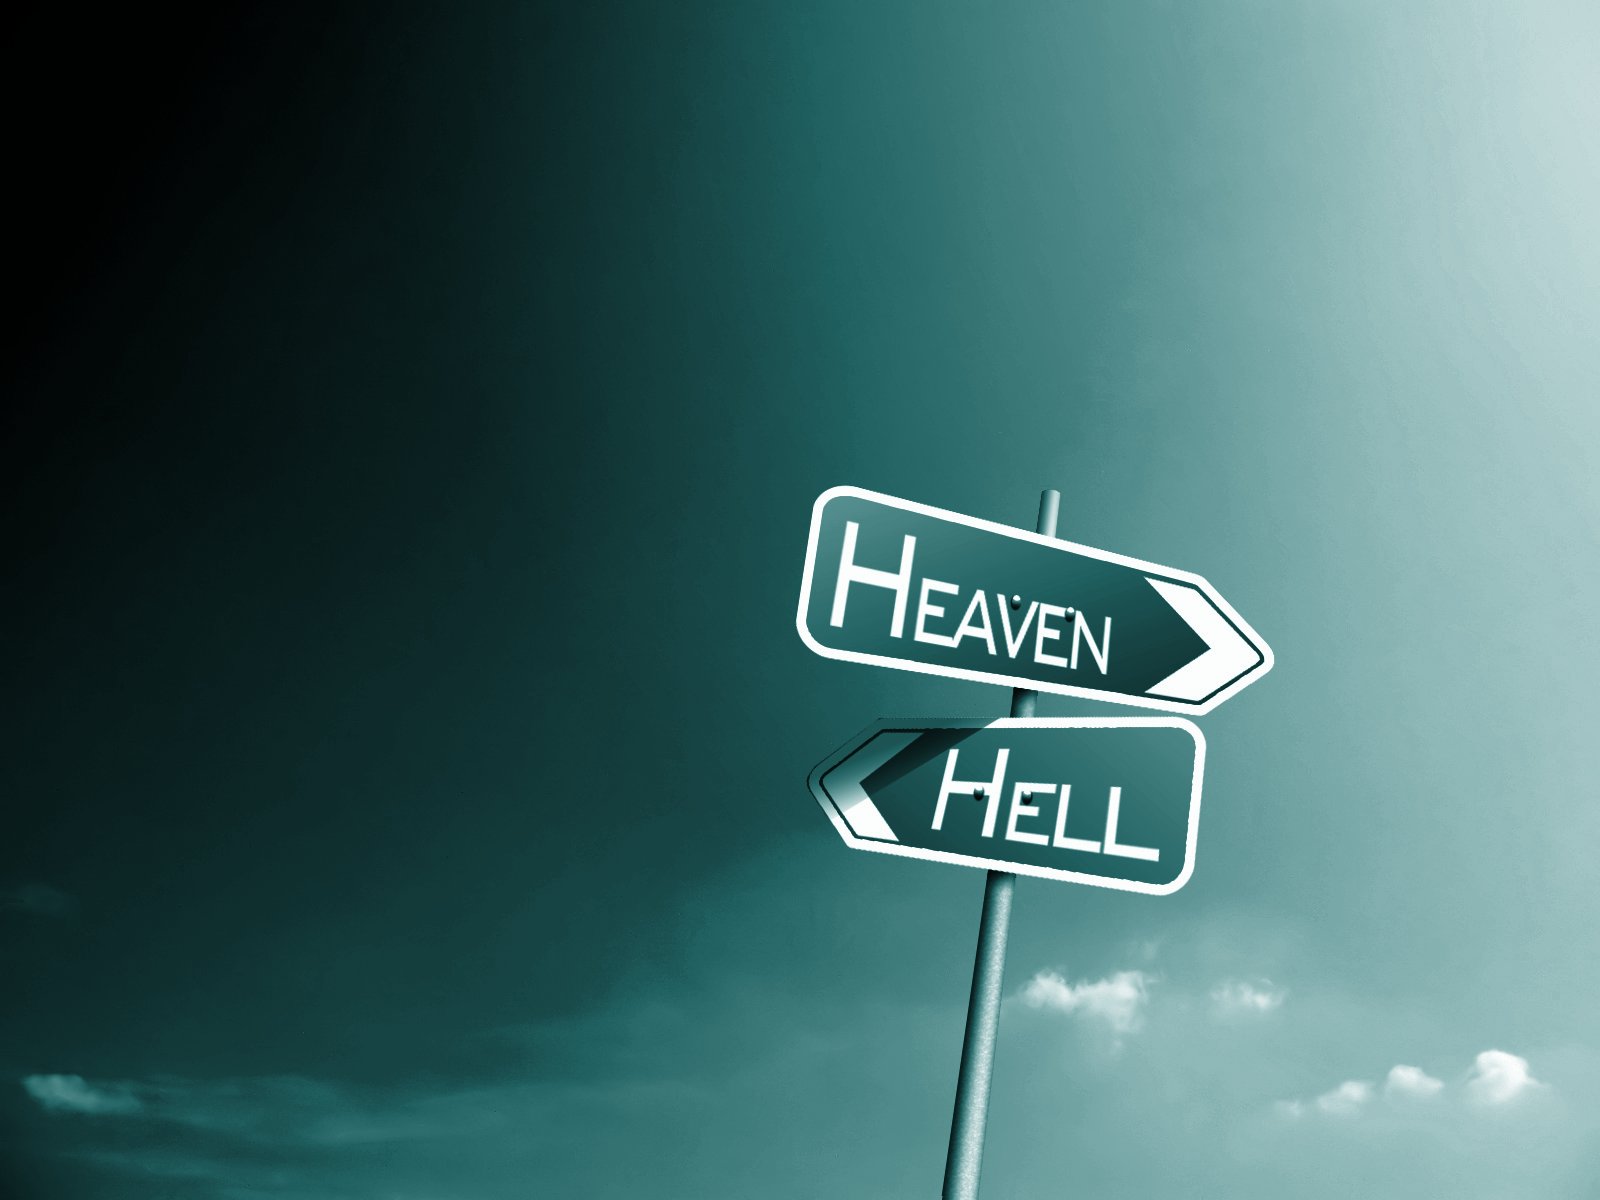 Hq Heaven Or Hell Wallpaper